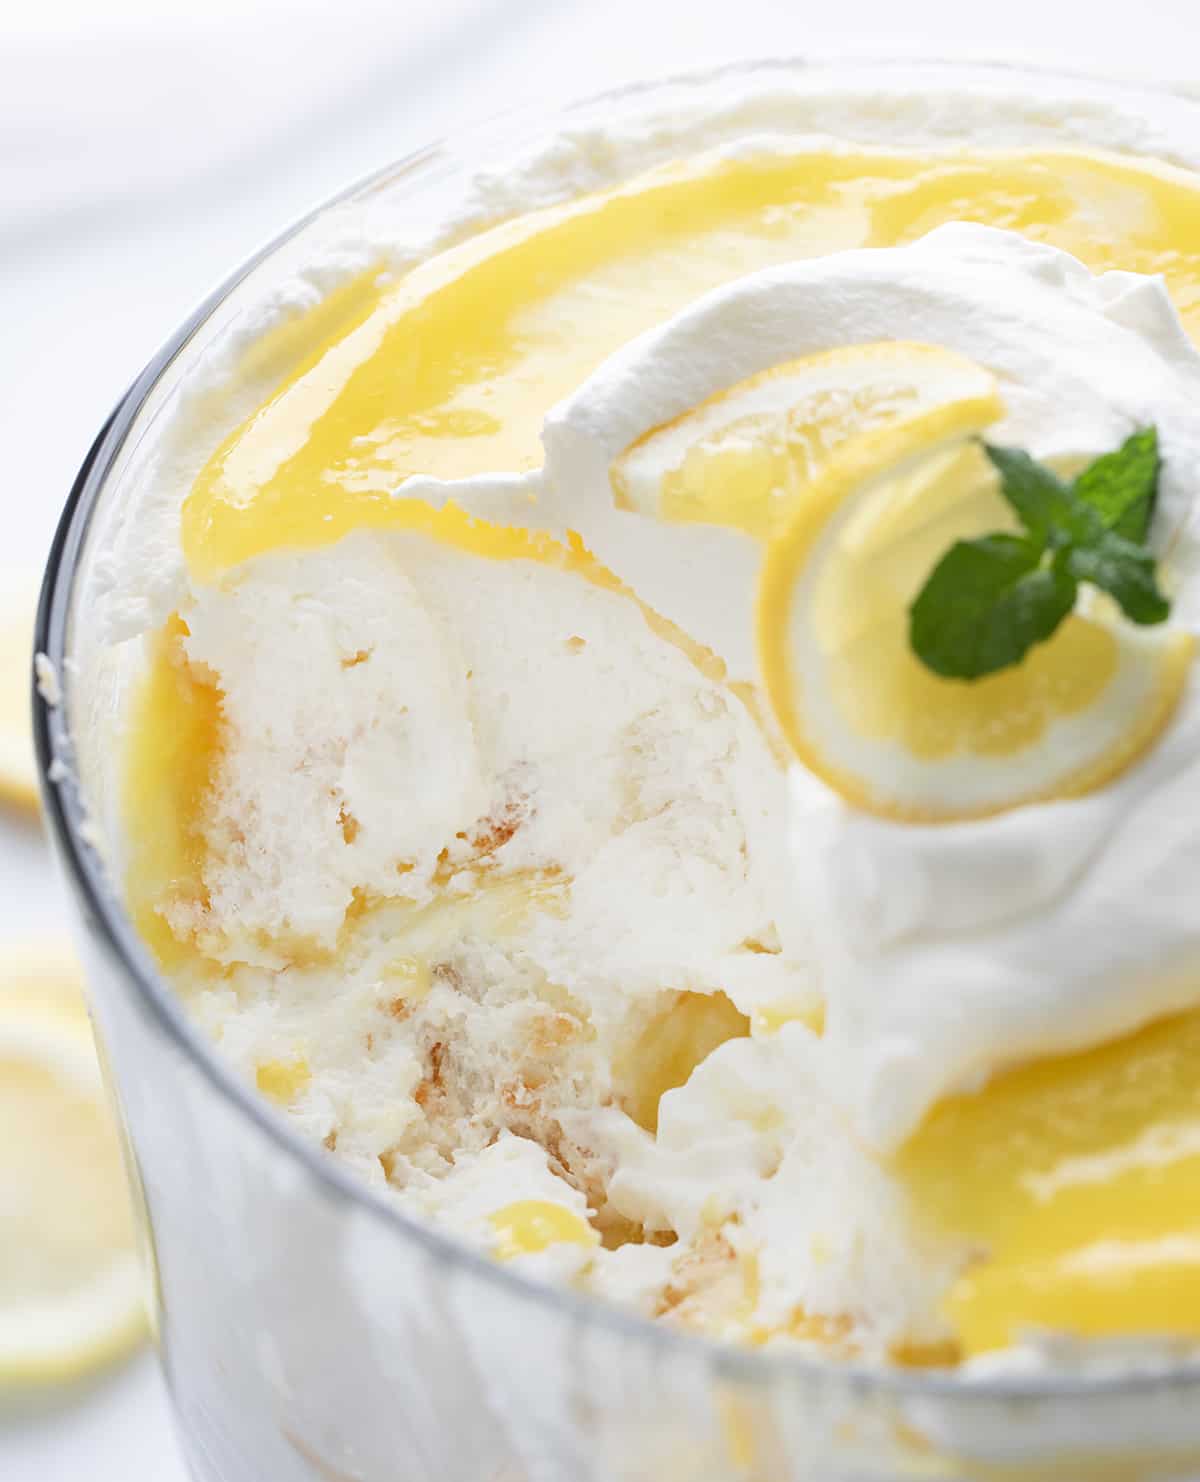 Lemon Cream Trifle with some Removed Showing the Gooey Texture inside.